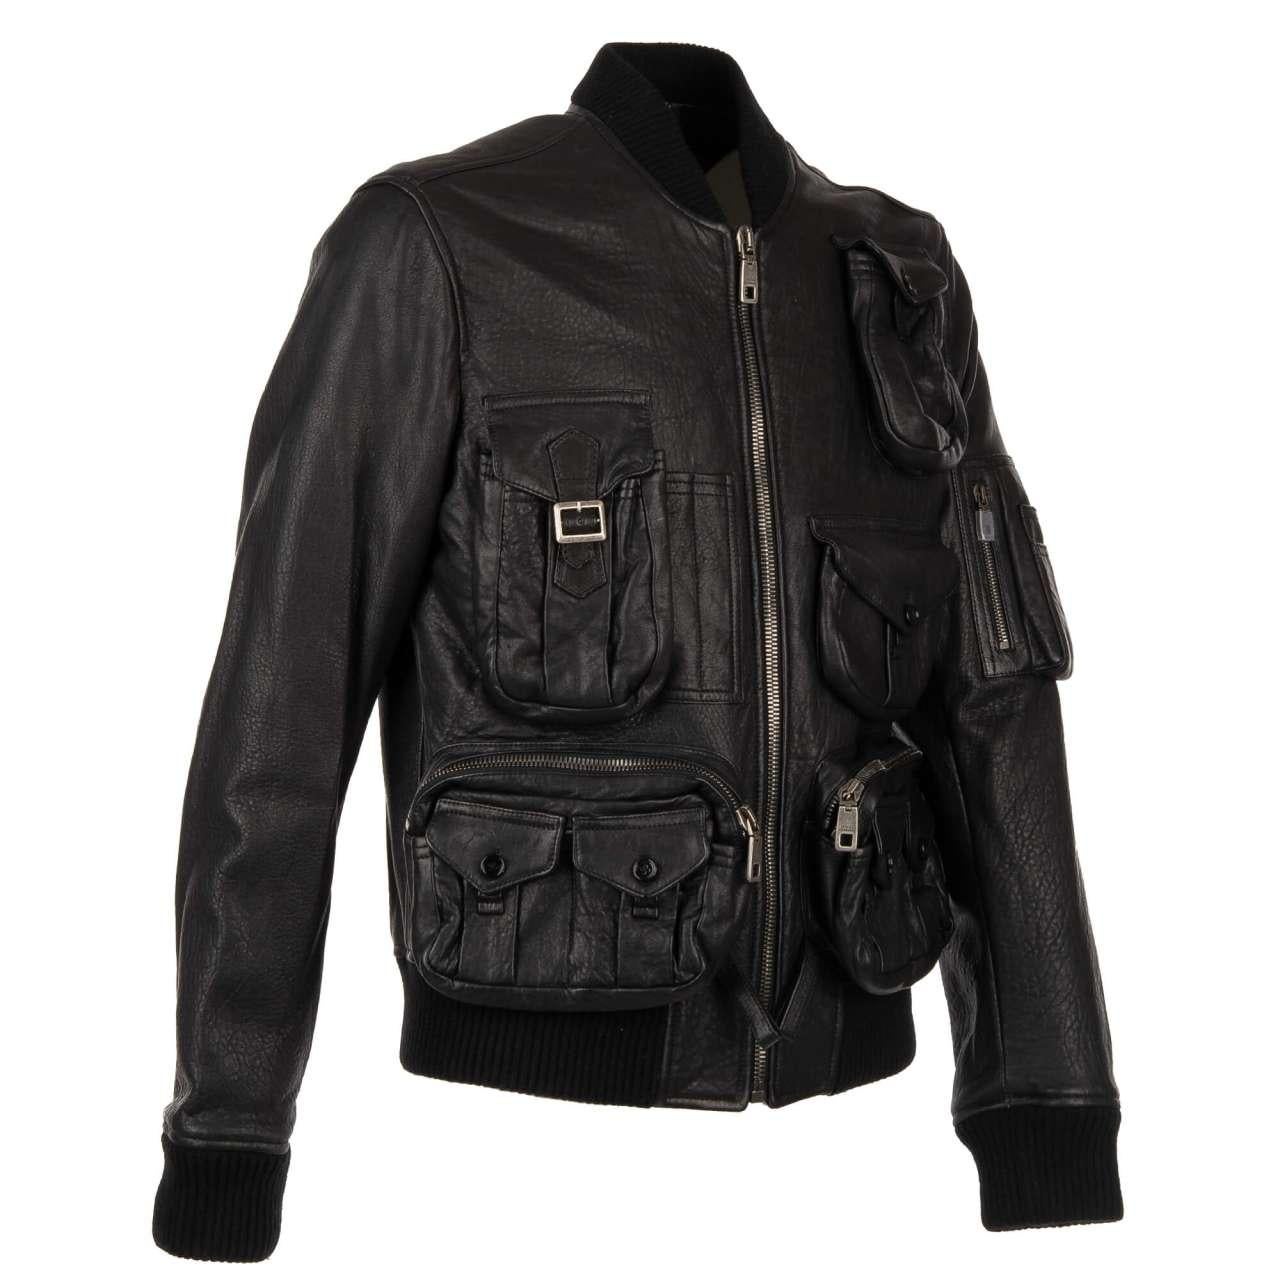 Dolce & Gabbana - Multi-Pocket Military Inspired Nappa Leather Jacket Black 46 In Excellent Condition For Sale In Erkrath, DE